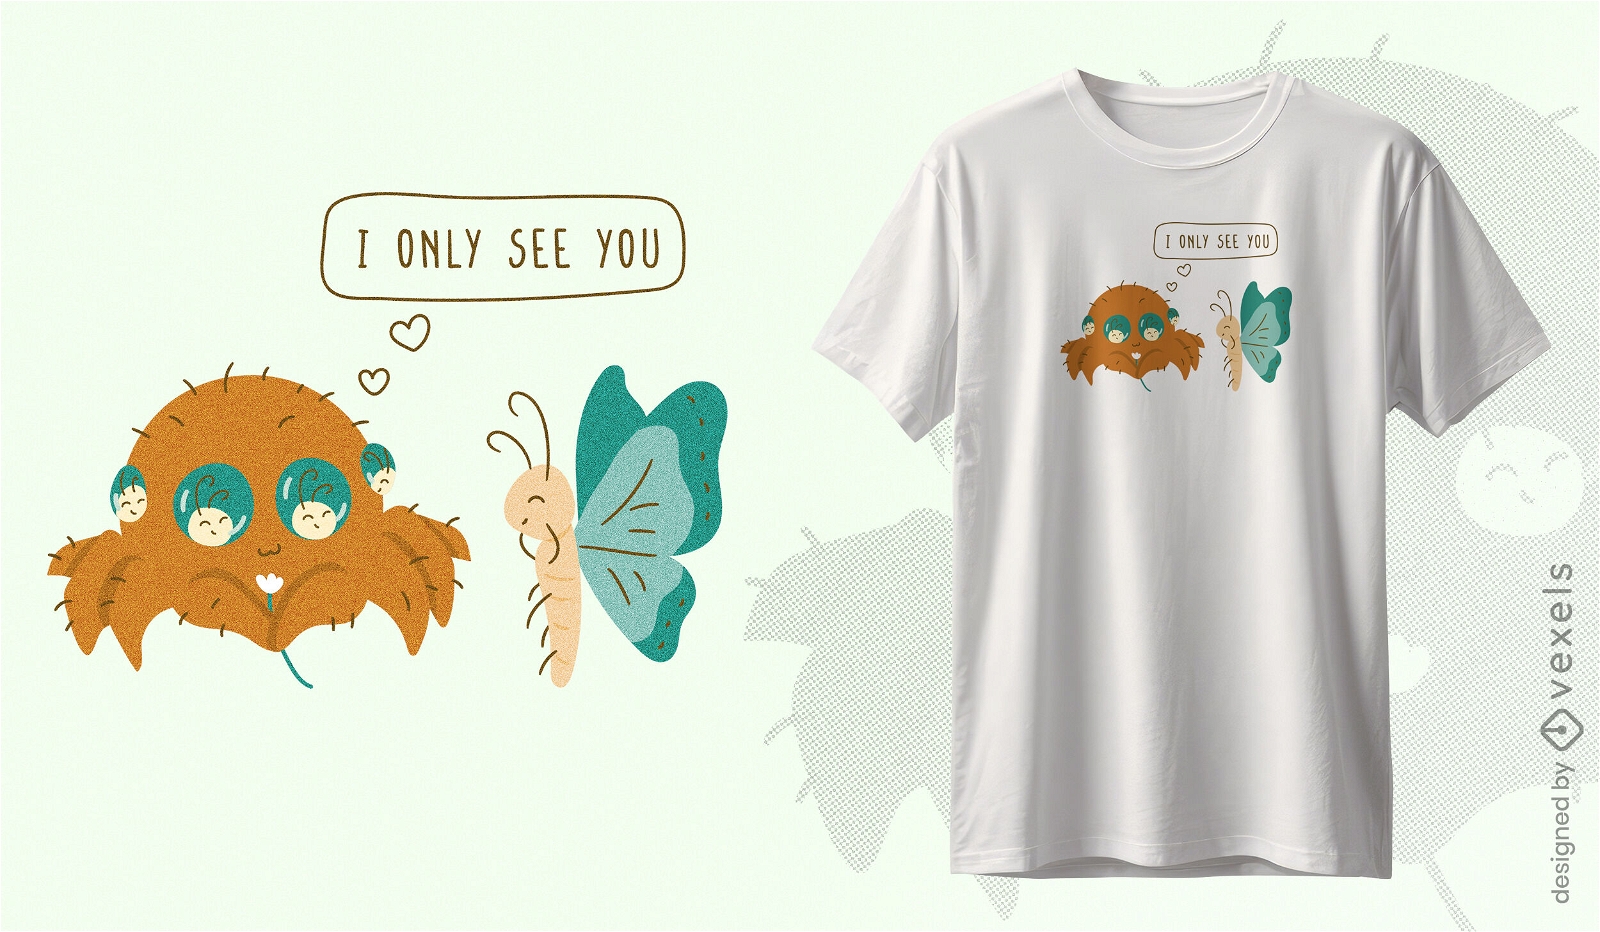 Spider and butterfly love t-shirt design